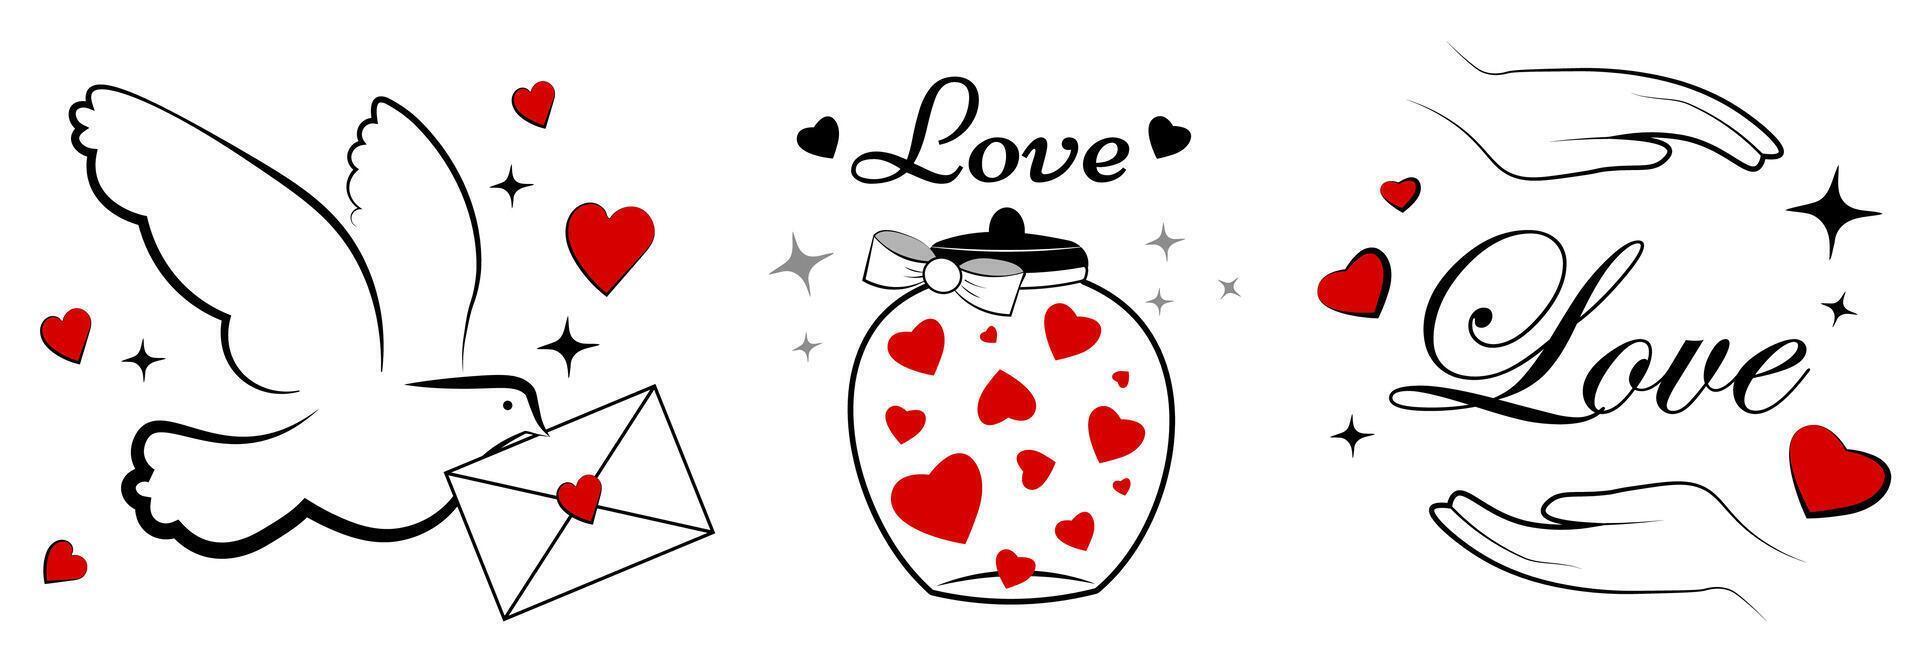 Valentine's Day. Doodle. Set of illustrations with red hearts vector